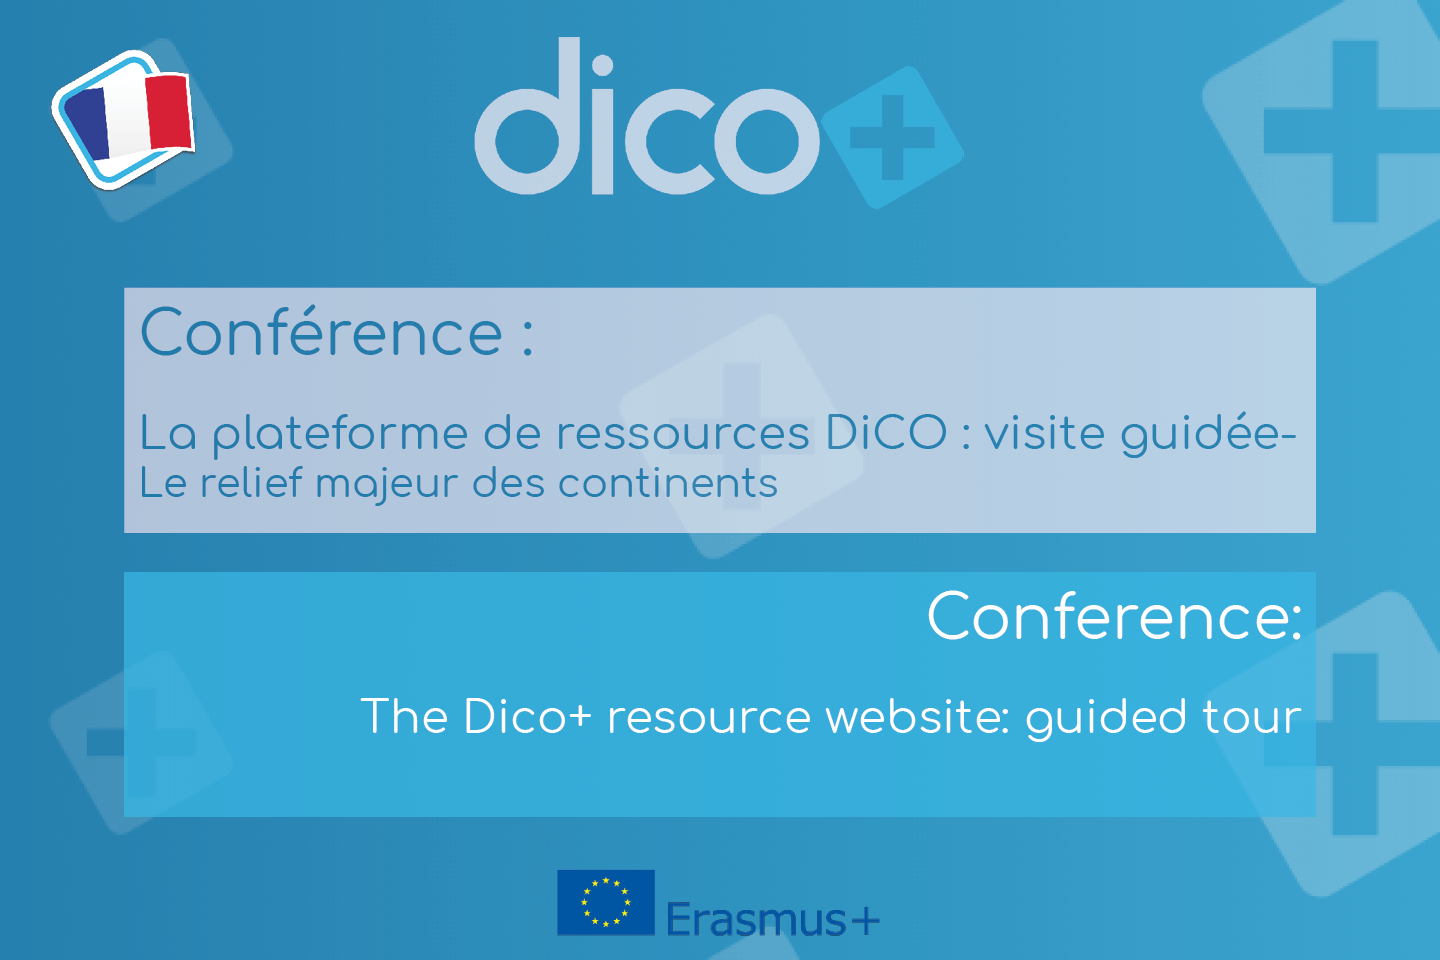 The DiCO+ ressource website: guided tour